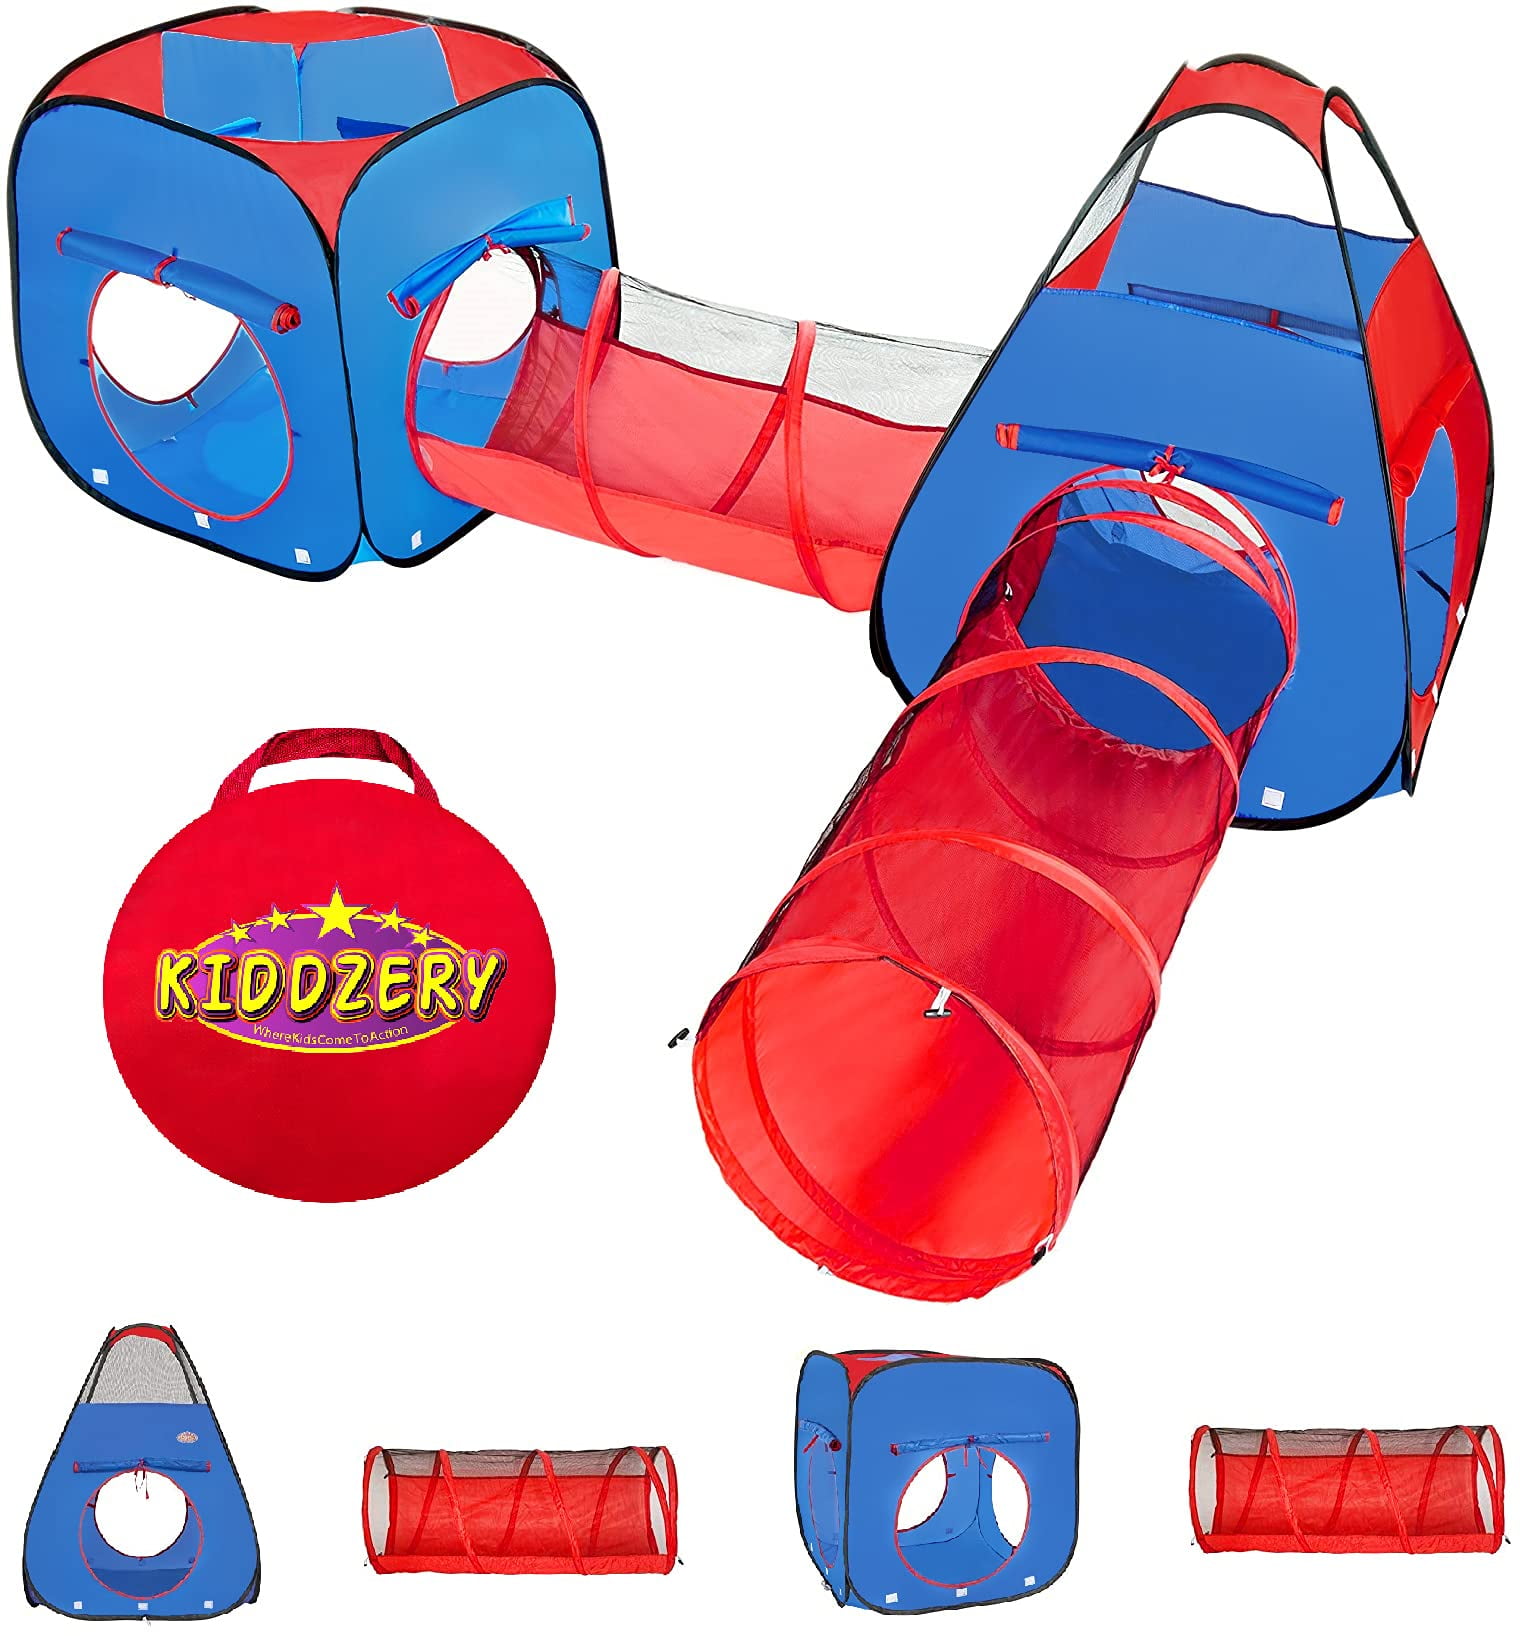 2 Tents Crawl Tunnels for sale online Kiddzery 4pc Kids Play Tent Pop up Ball Pit 